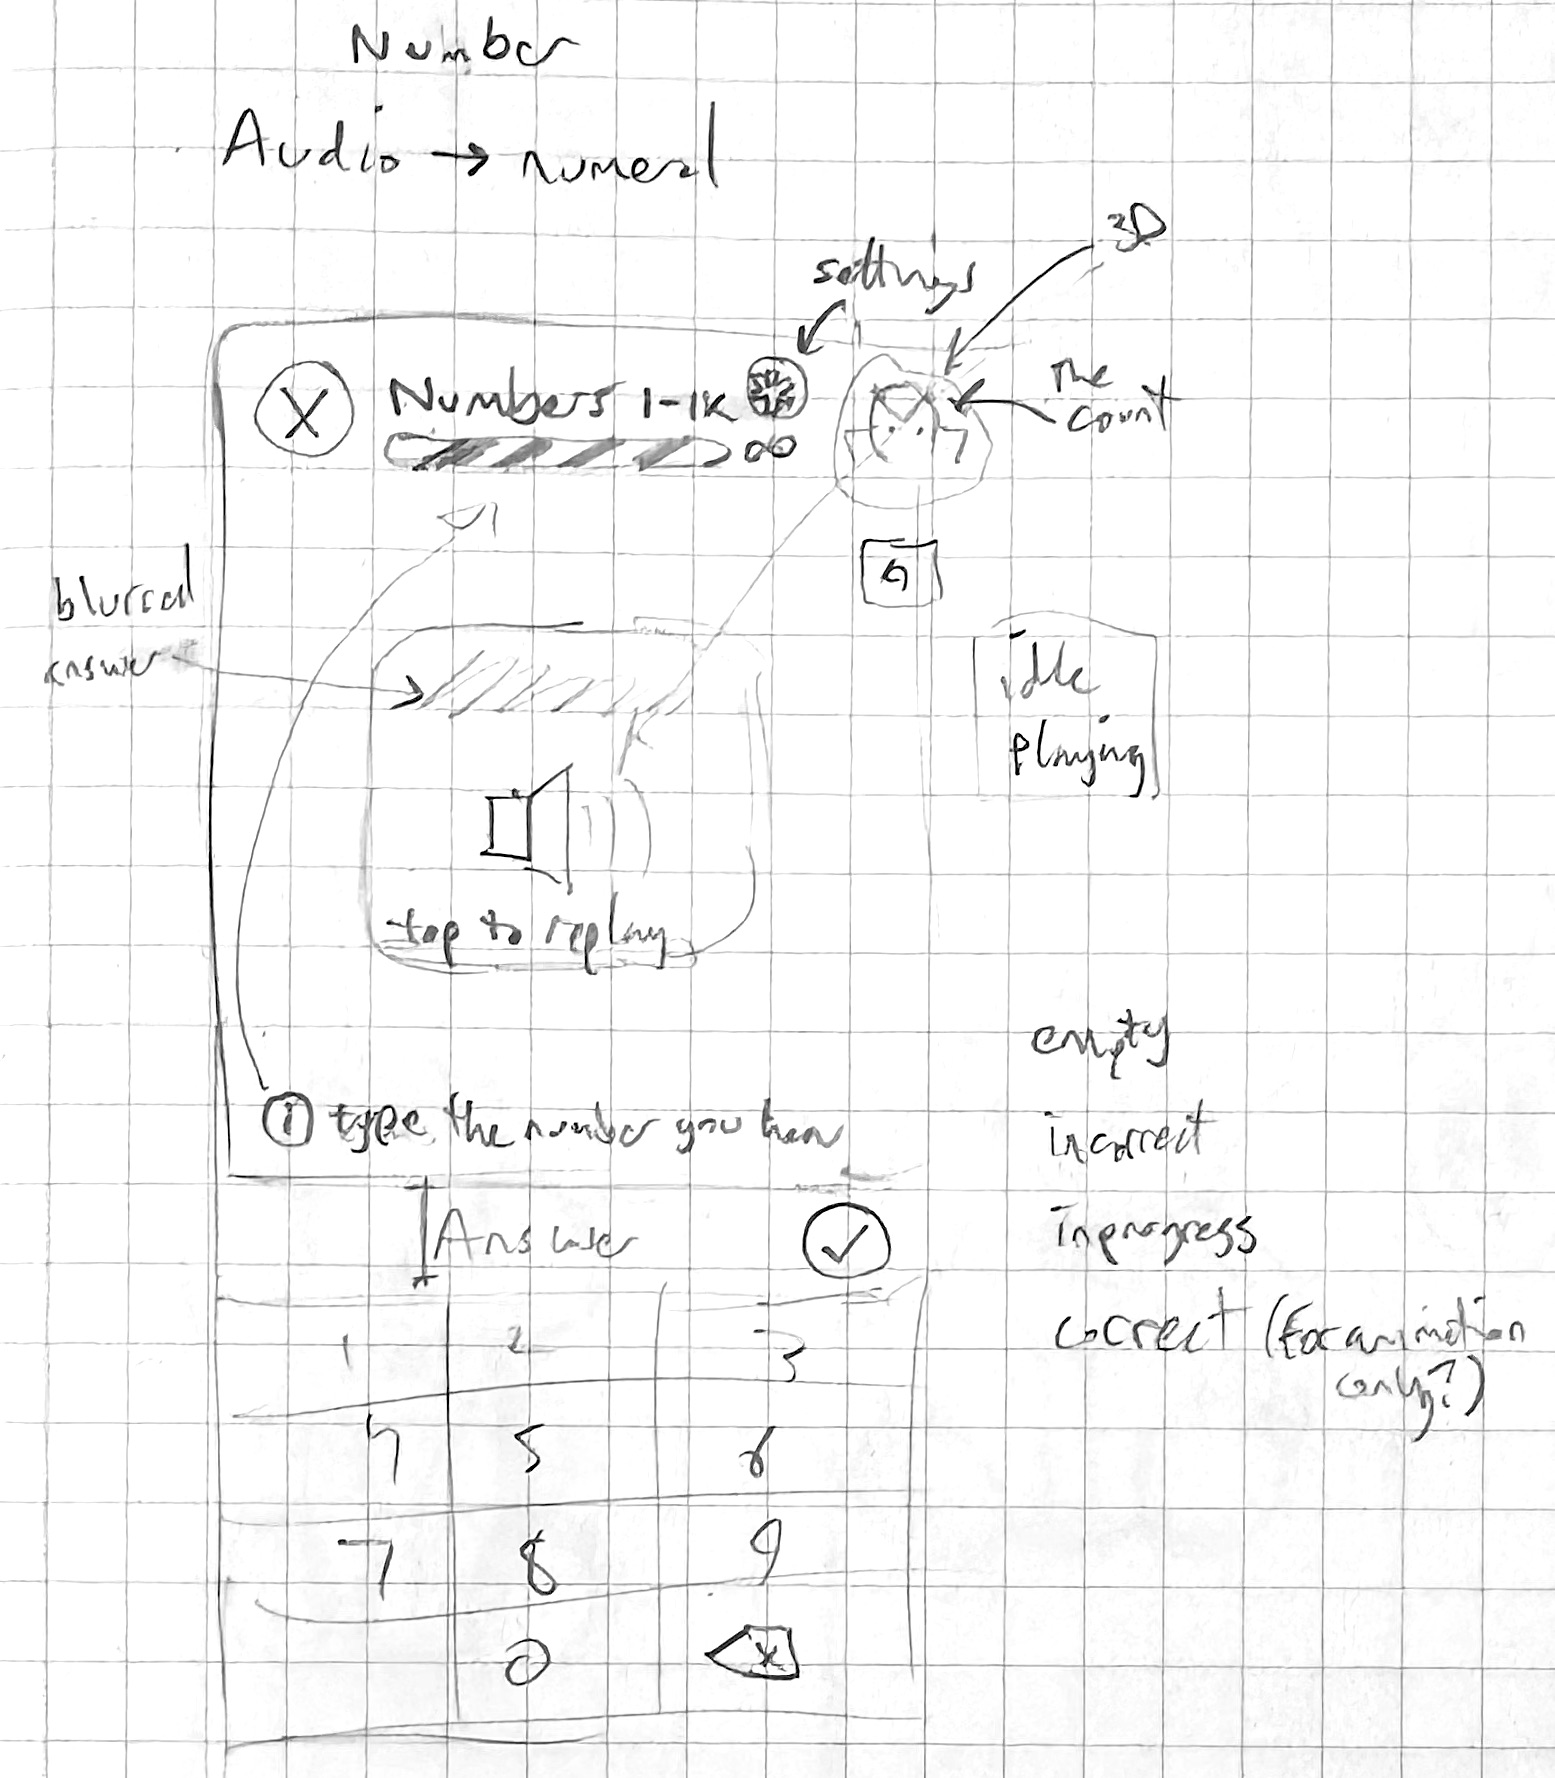 The first UI sketch in my notebook